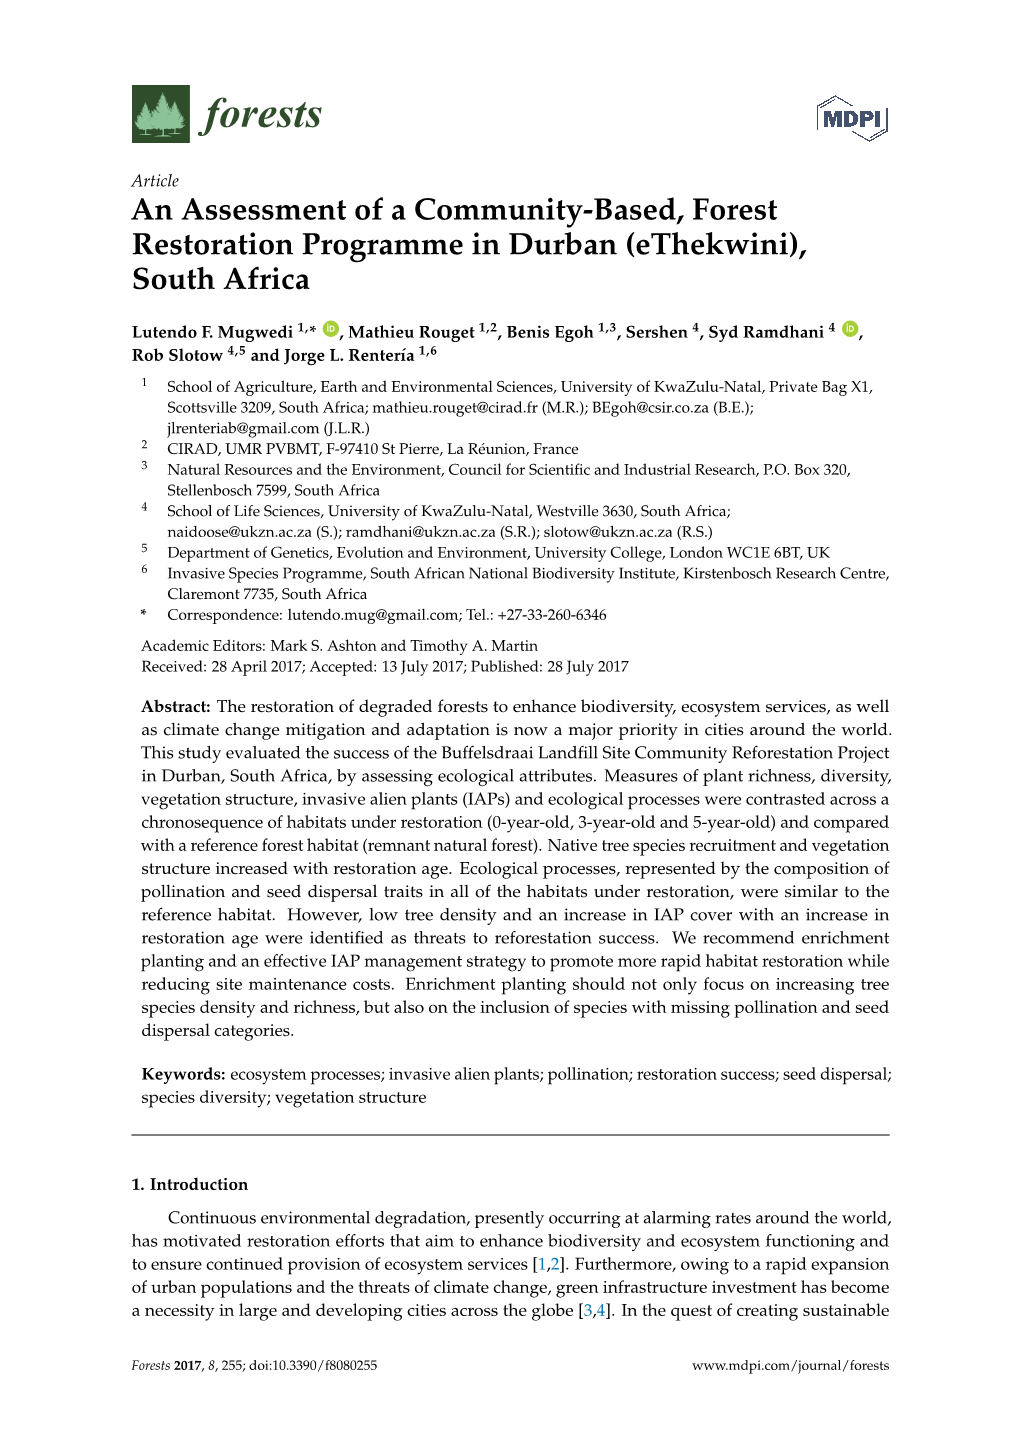 An Assessment of a Community-Based, Forest Restoration Programme in Durban (Ethekwini), South Africa